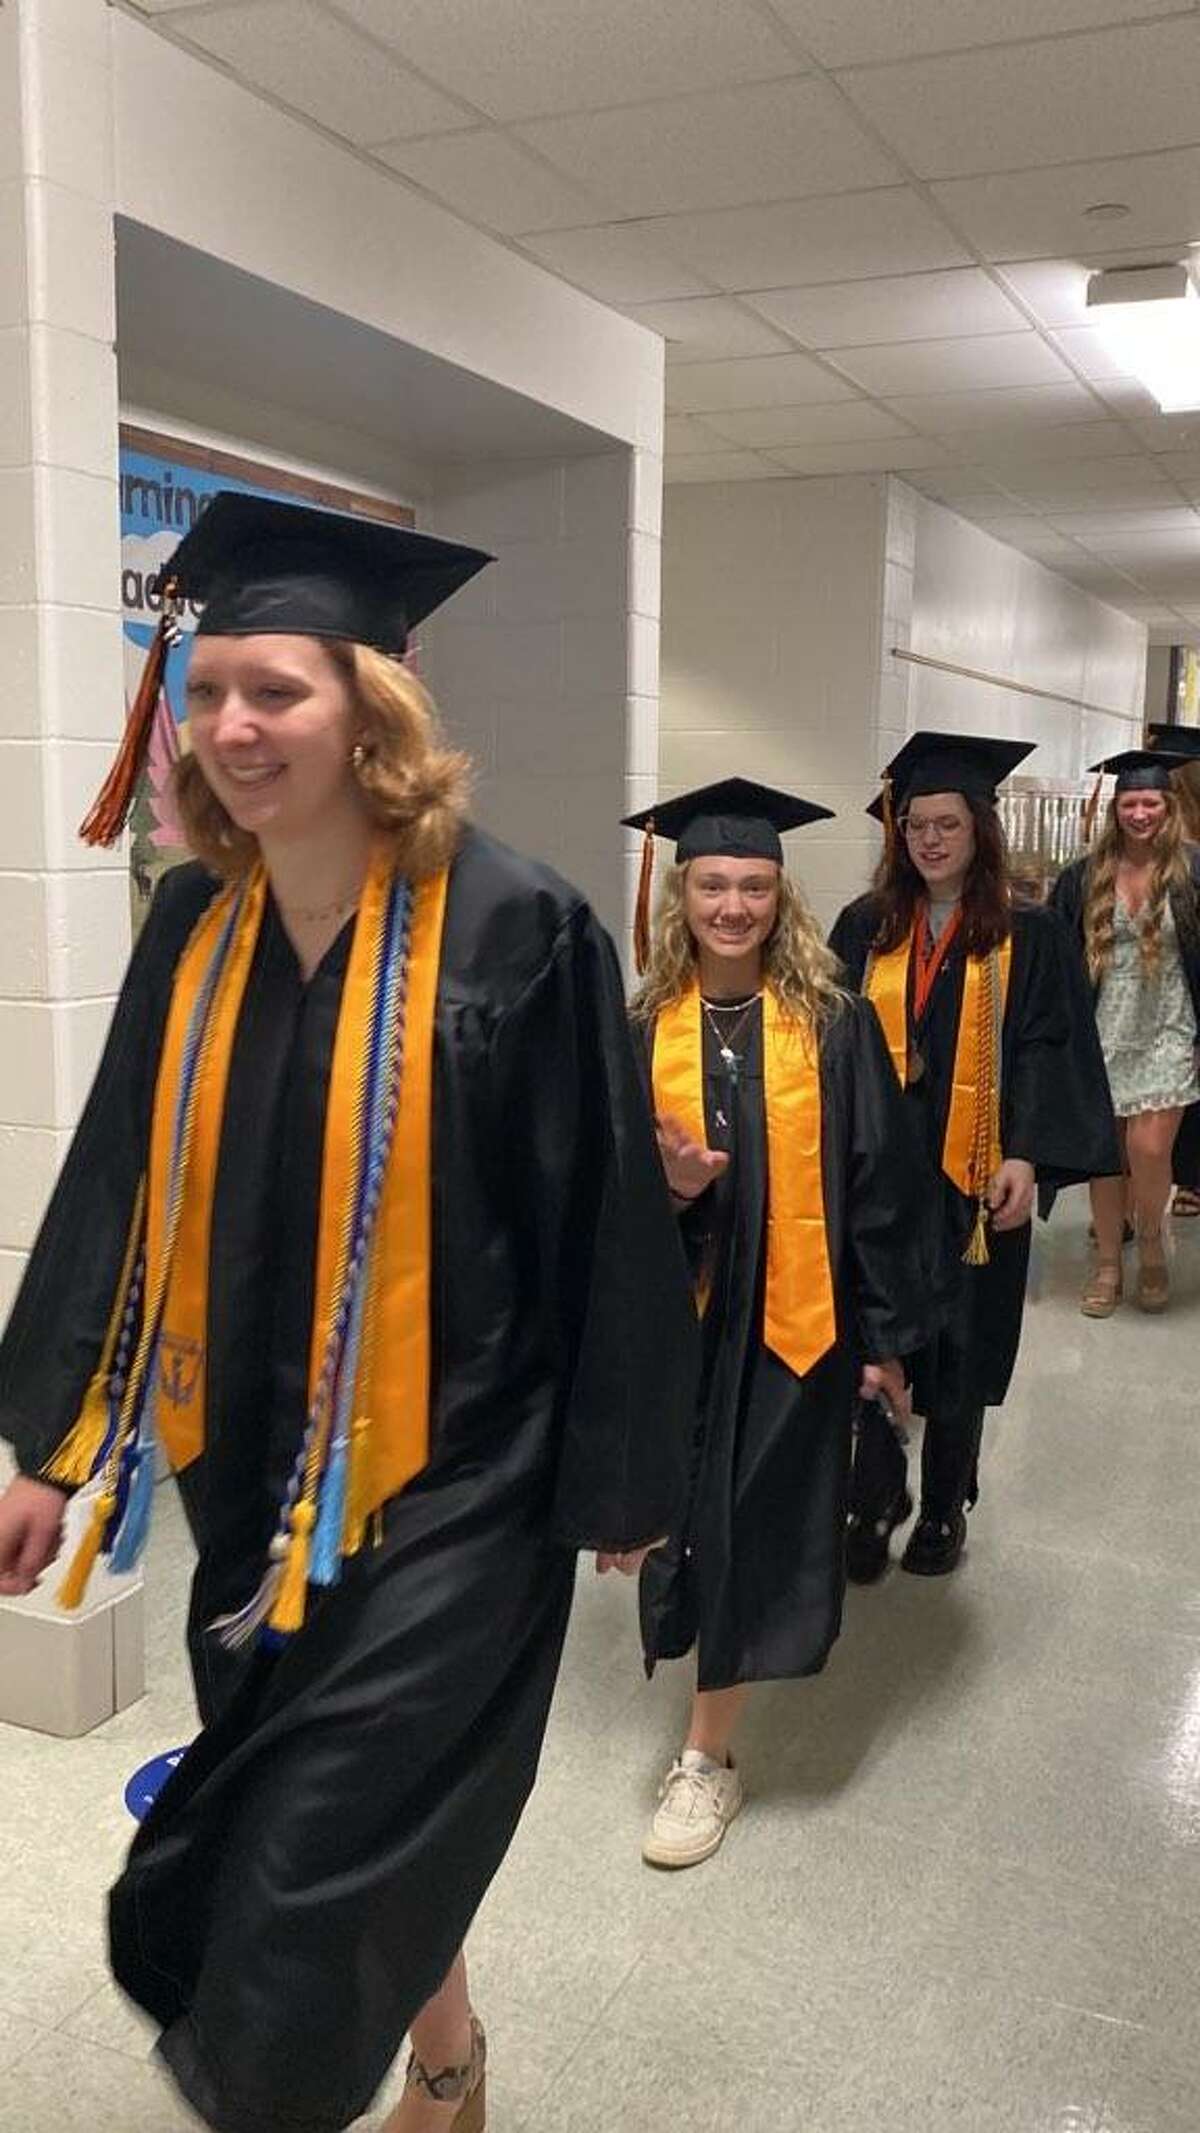 Edwardsville High School seniors who attended Midway Elementary School at the beginning of their District 7 careers visited the school as students one last time before graduation for District 7's first Senior Clap Out. 